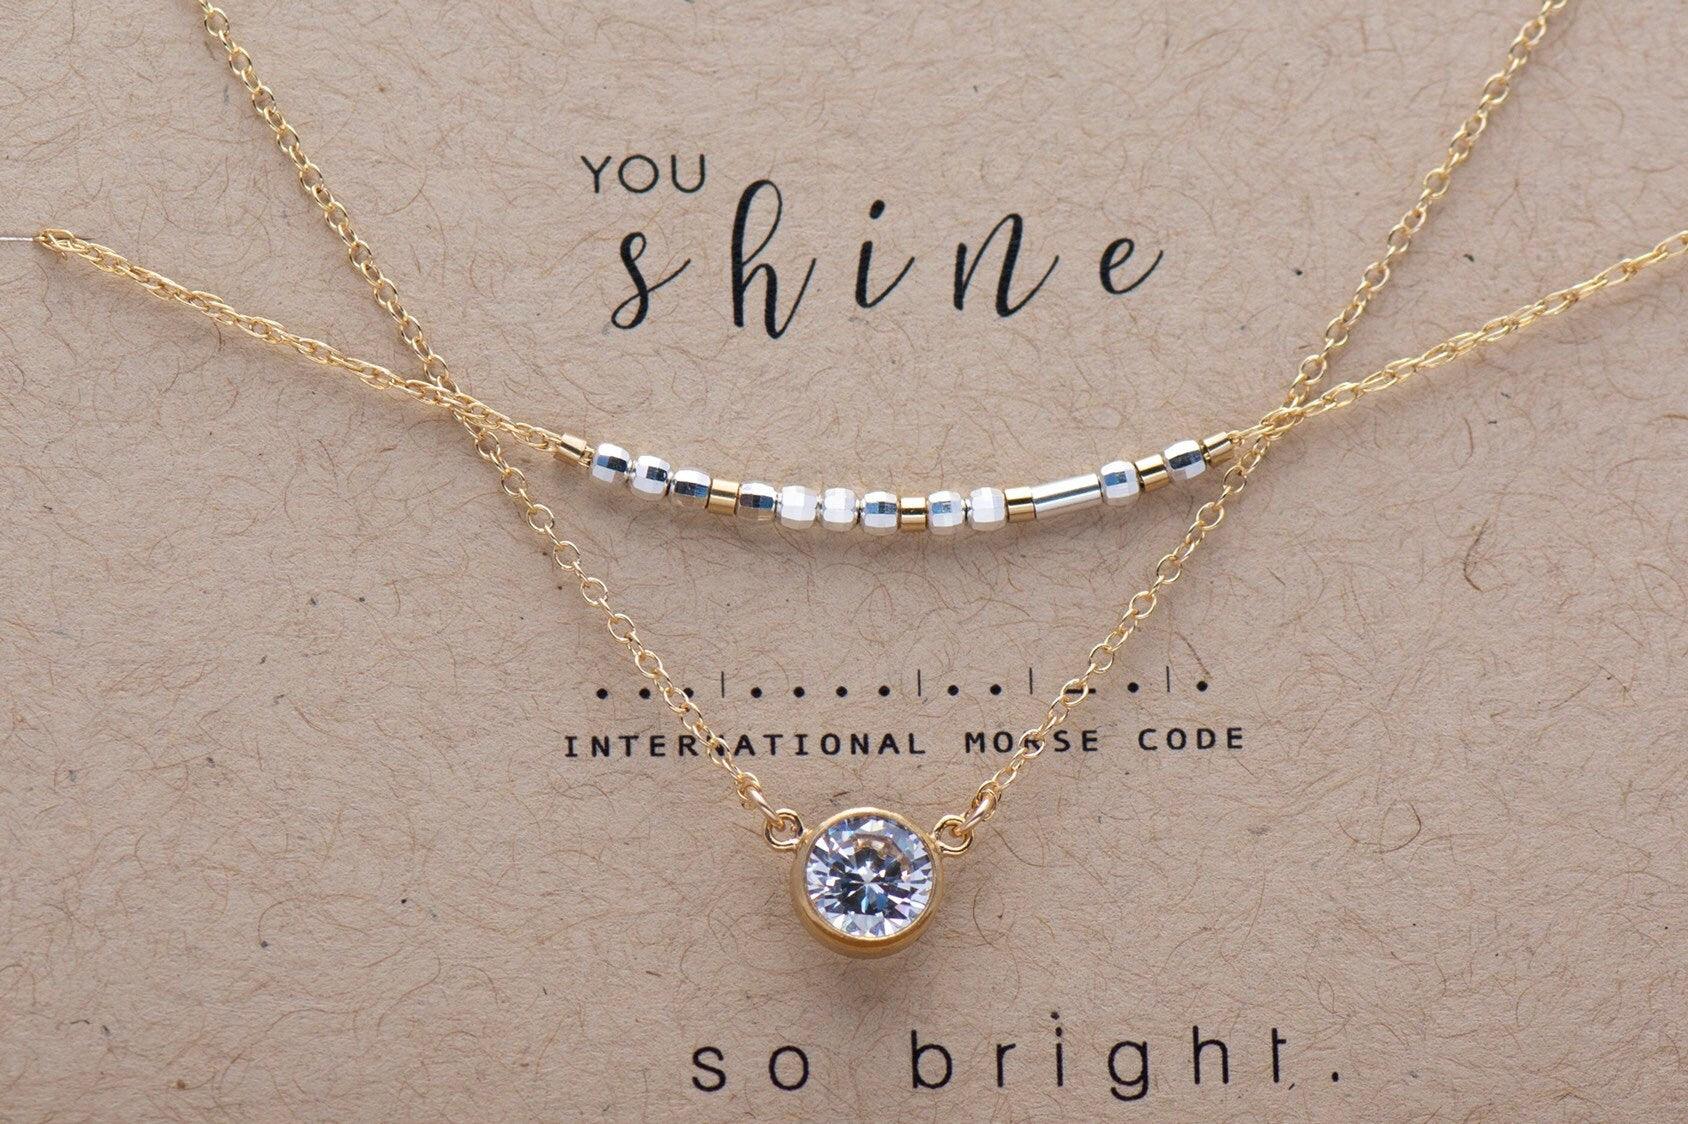 Shine Morse Code Necklace • Shine Bright best friend gifts •Graduation Gift for Graduate • Congrats Shining necklace motivational gift - Morse and Dainty